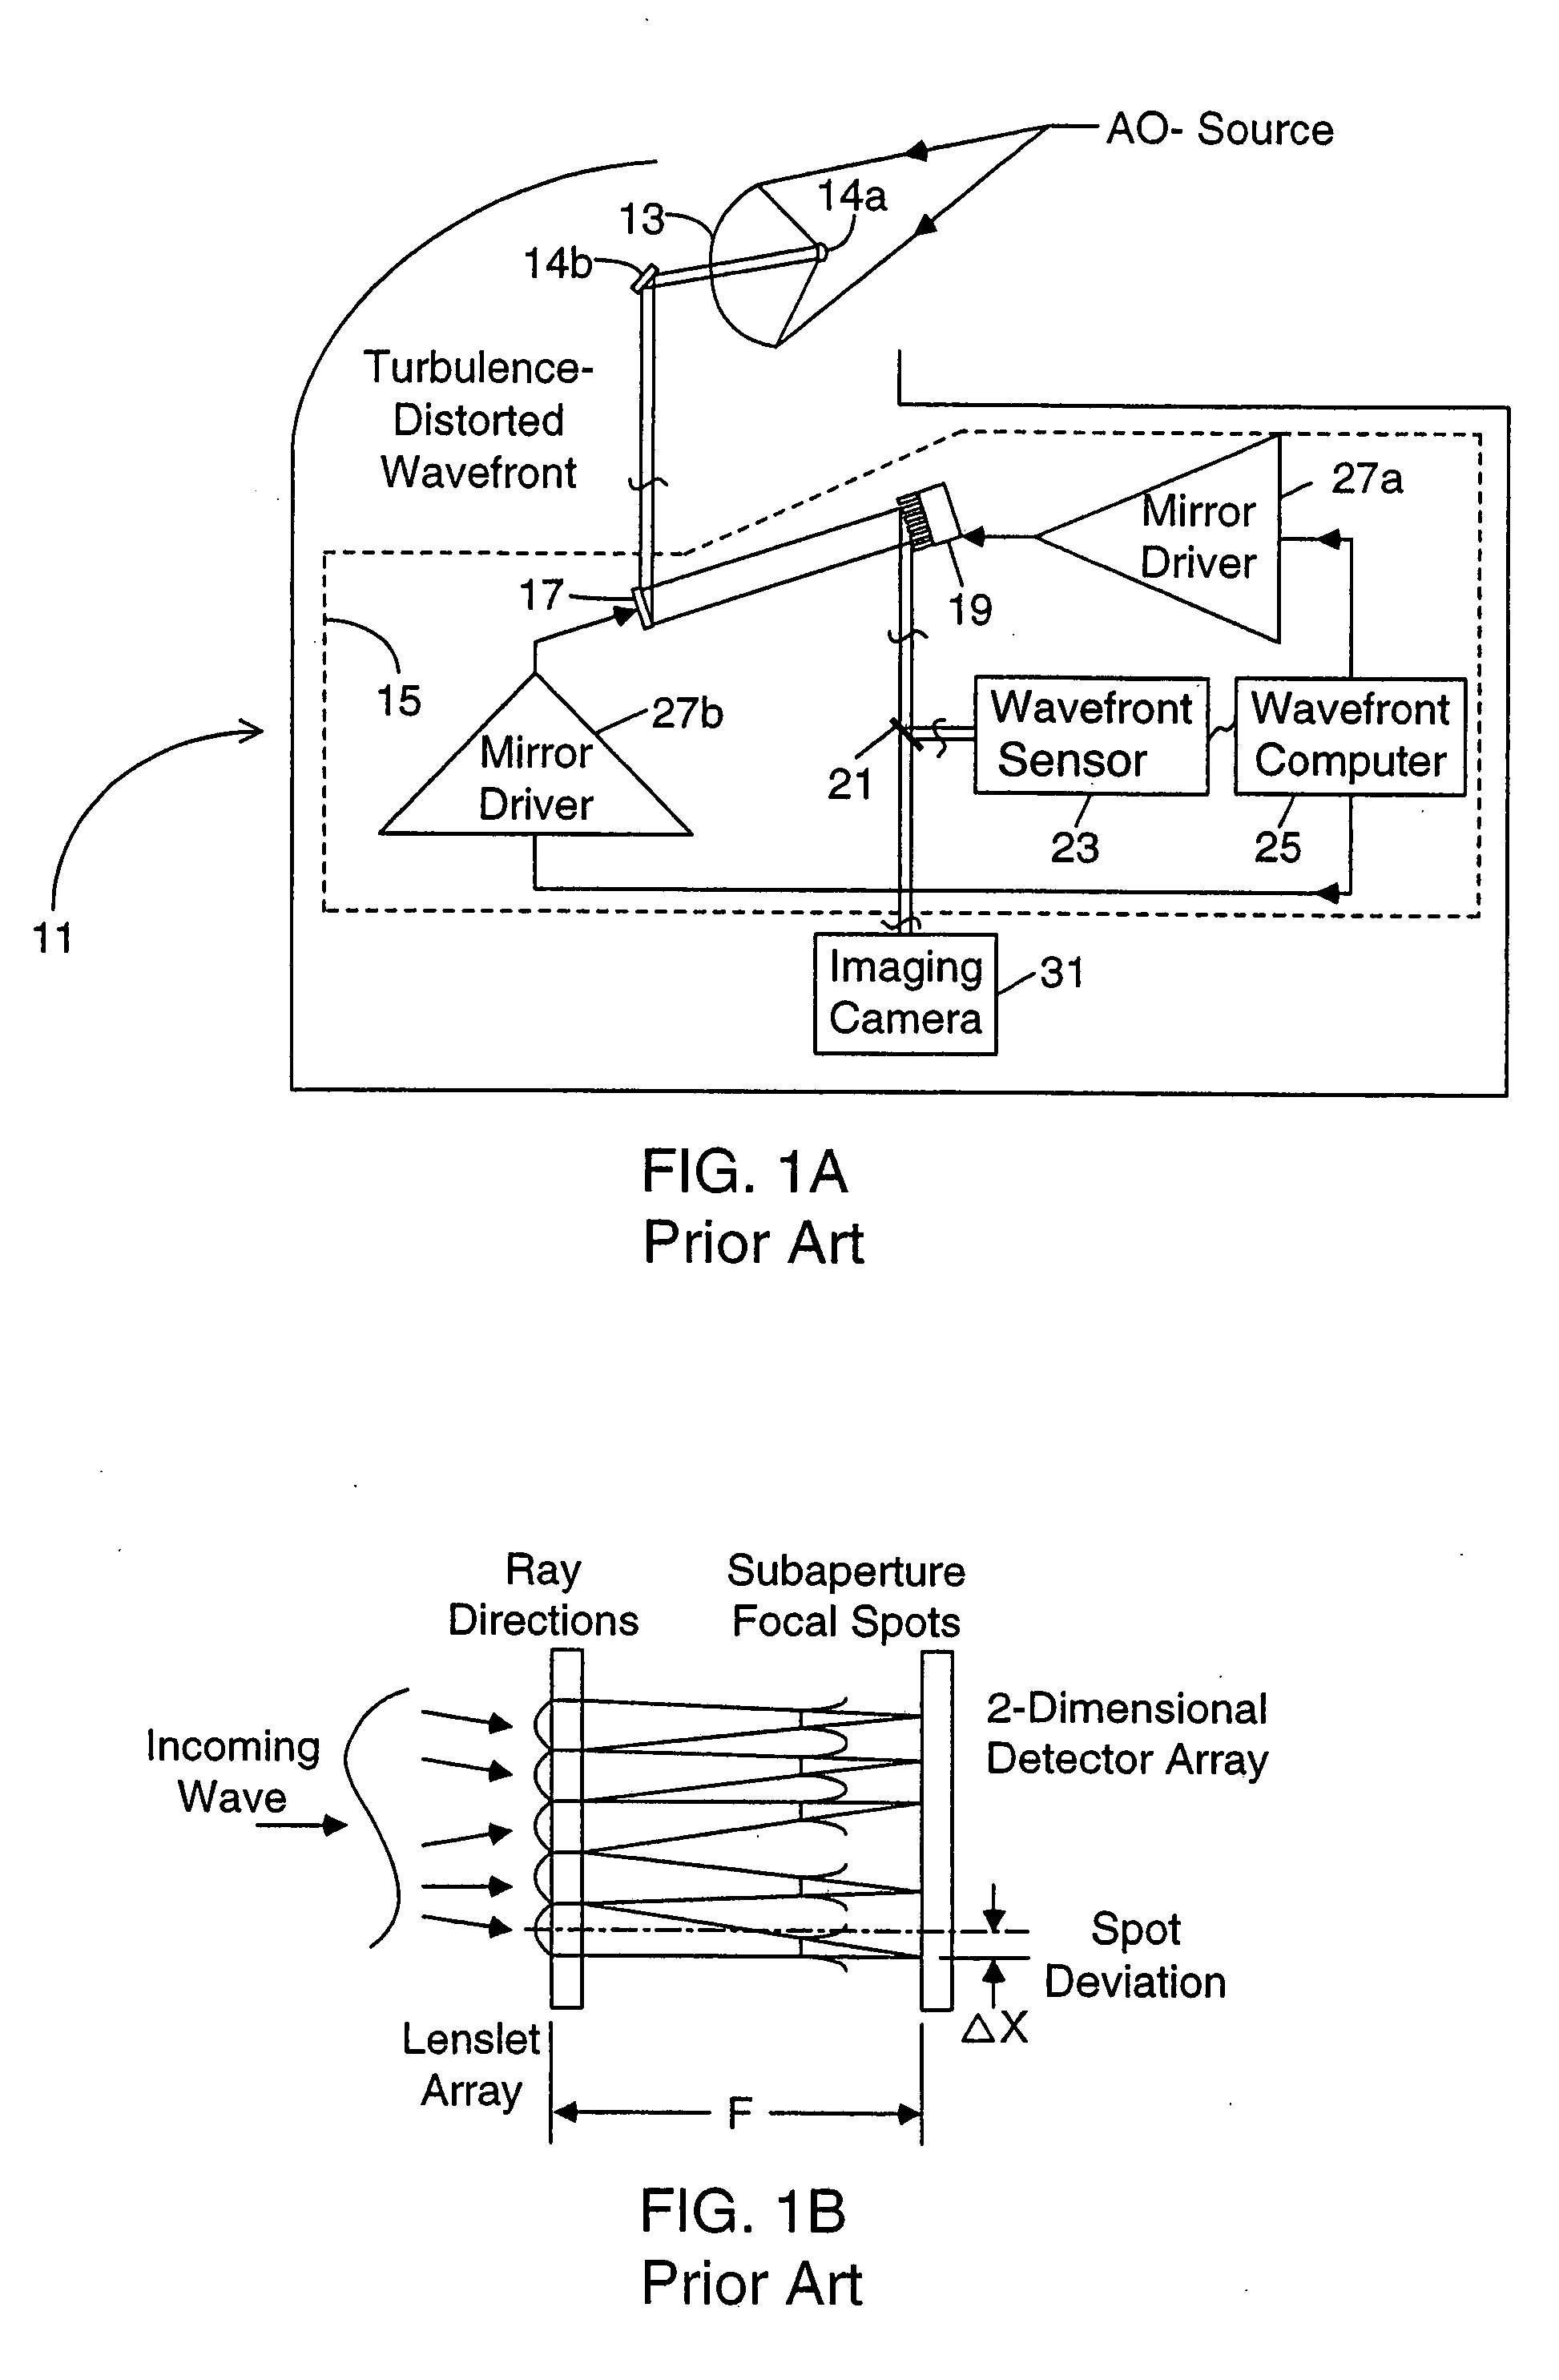 Method and apparatus for wavefront measurement that resolves the 2-pi ambiguity in such measurement and adaptive optics systems utilizing same